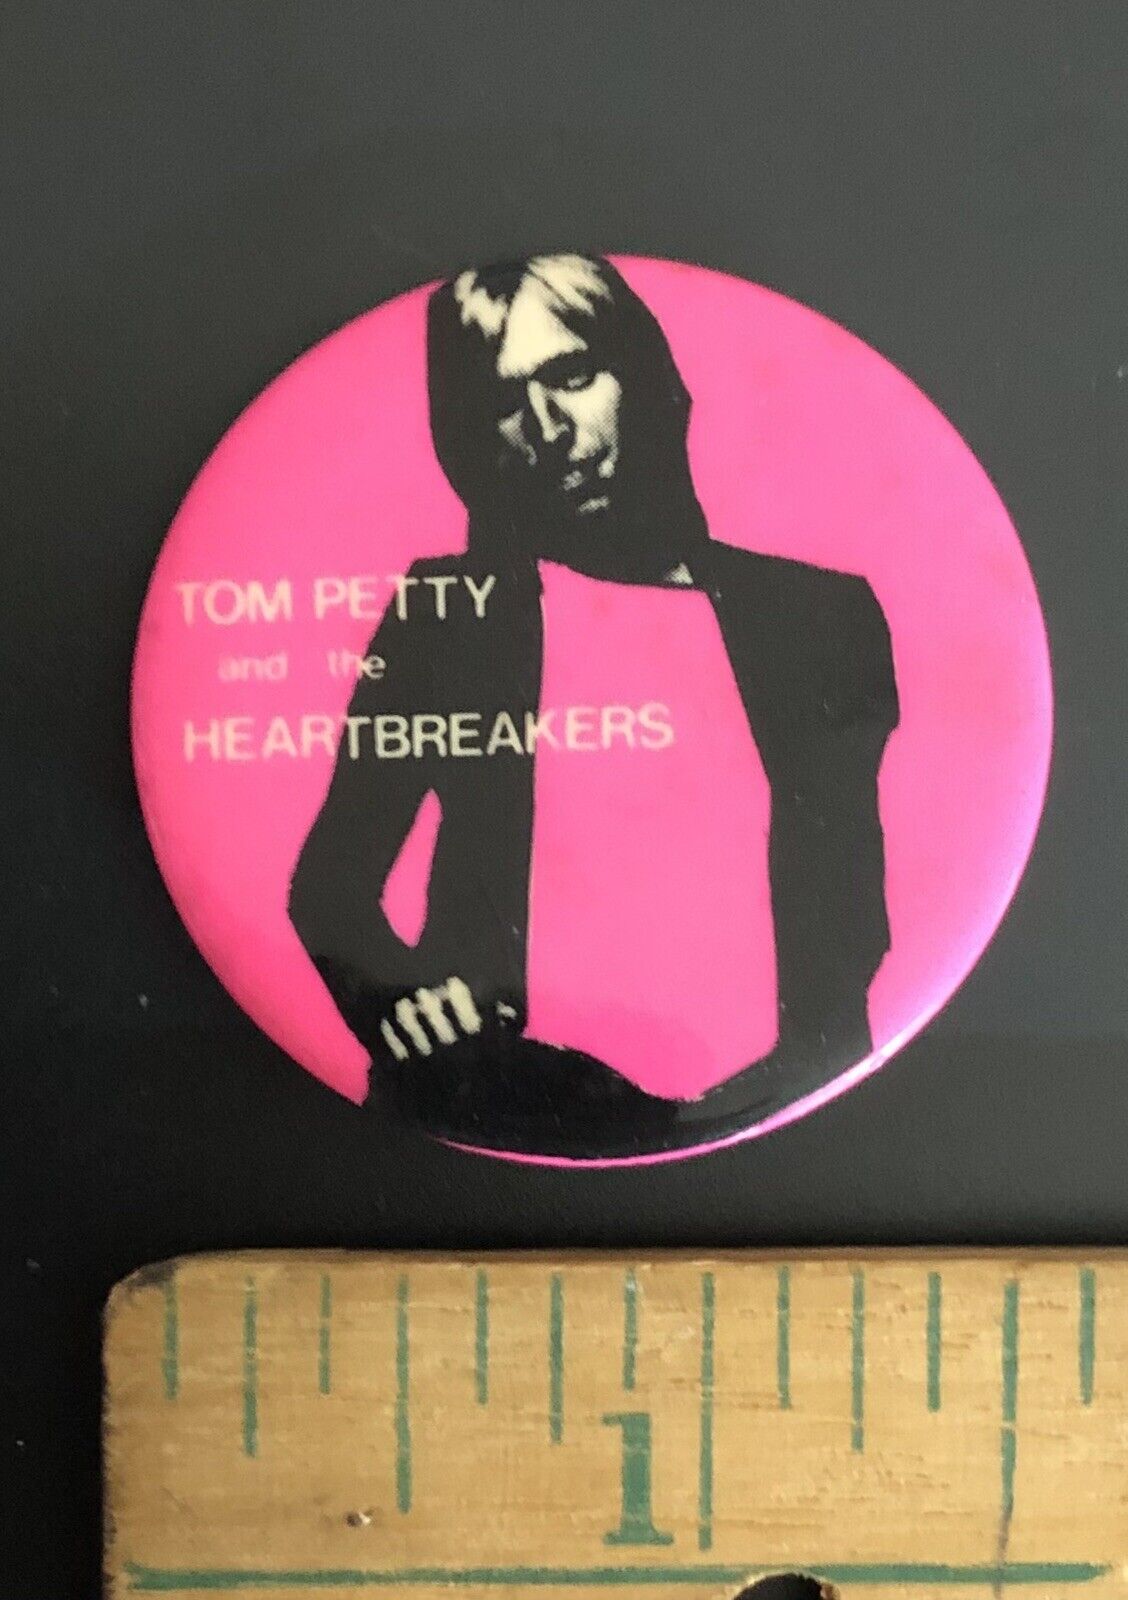 Tom Petty and the Heartbreakers Pinback Button - NM - Vintage 1.5” Pin